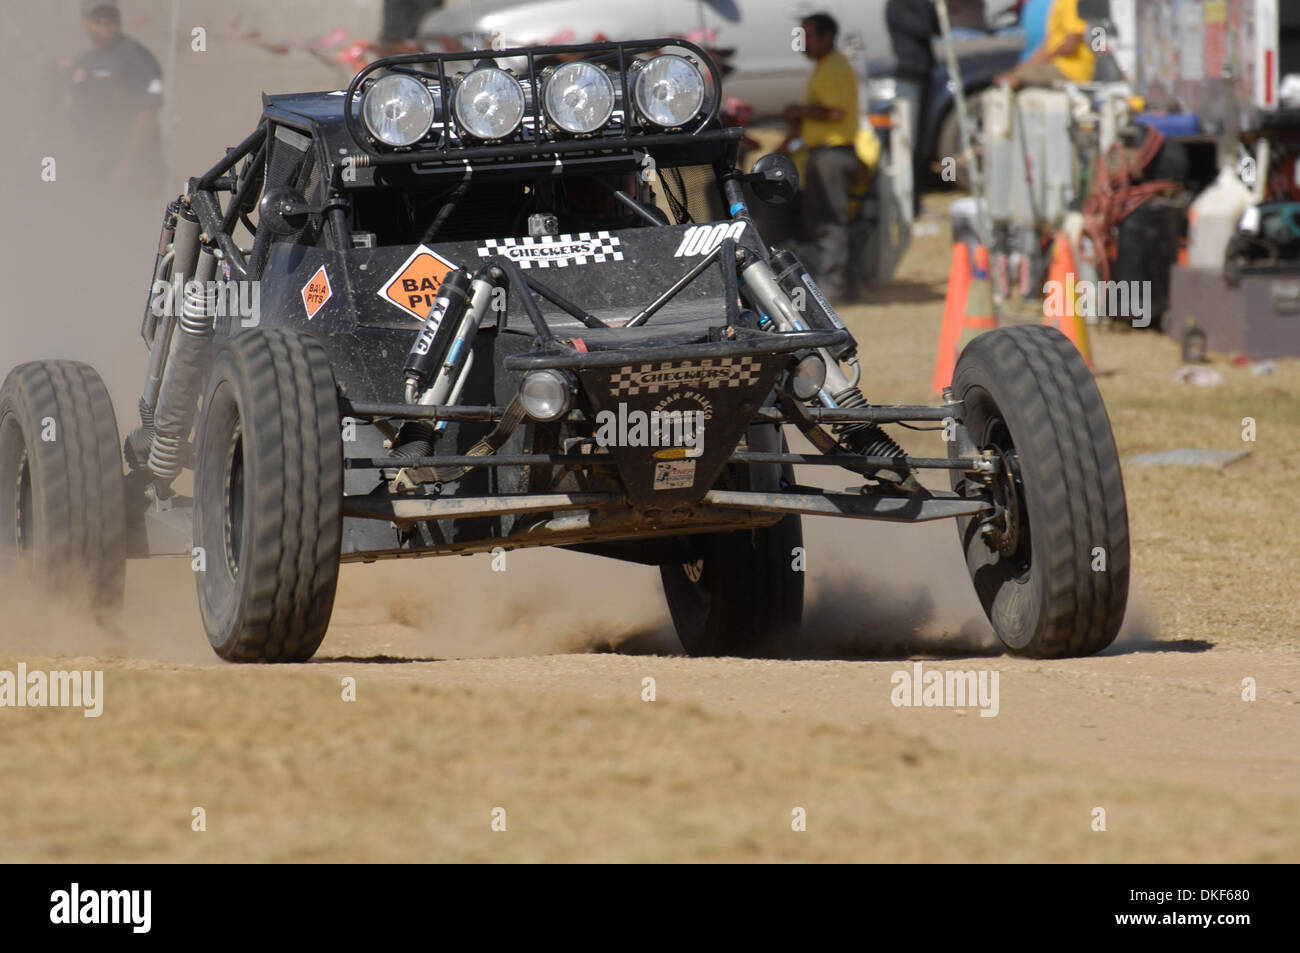 Jun 06, 2009 - Valle de la Trinidad, Baja Norte, Mexico - MIKE LAWRENCE, winner of Class 10 (Single- or two-seaters to 1650cc), races through the pits at mile 260 of the 41st Baja 500 race.  (Credit Image: © Stan Sholik/ZUMA Press) Stock Photo